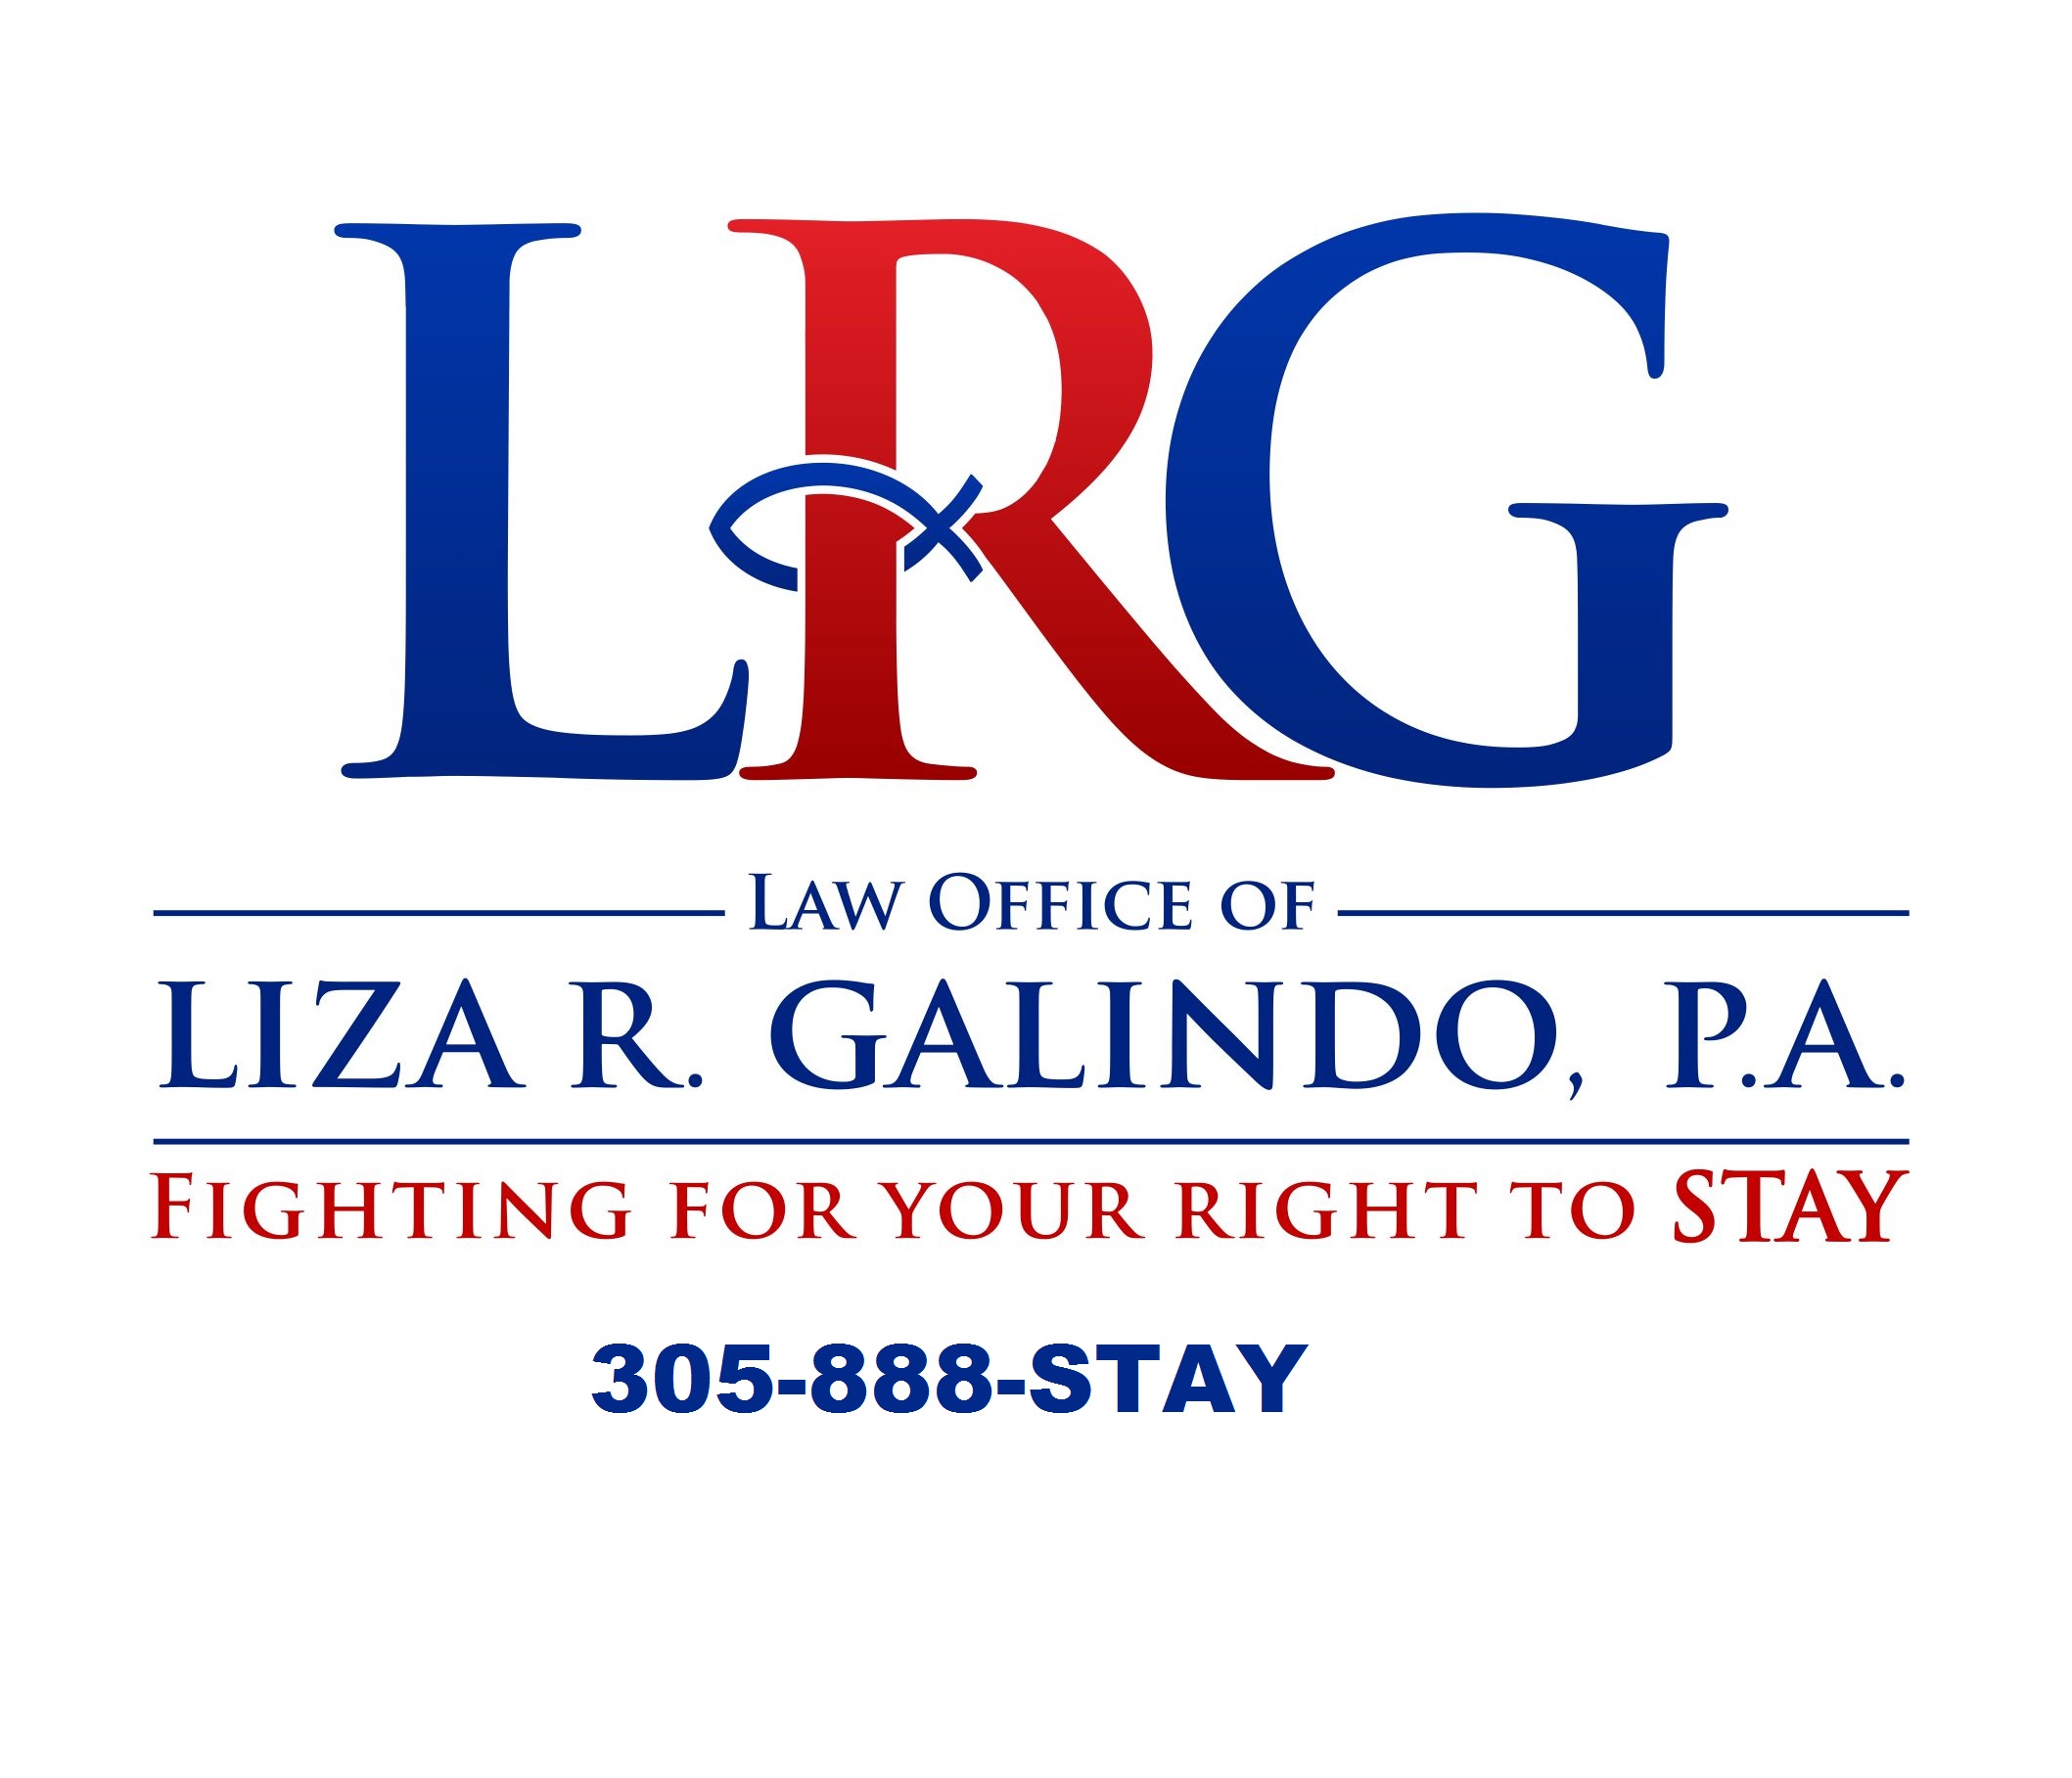 Liza R. Galindo, P.A., a Doral Chamber of Commerce member.